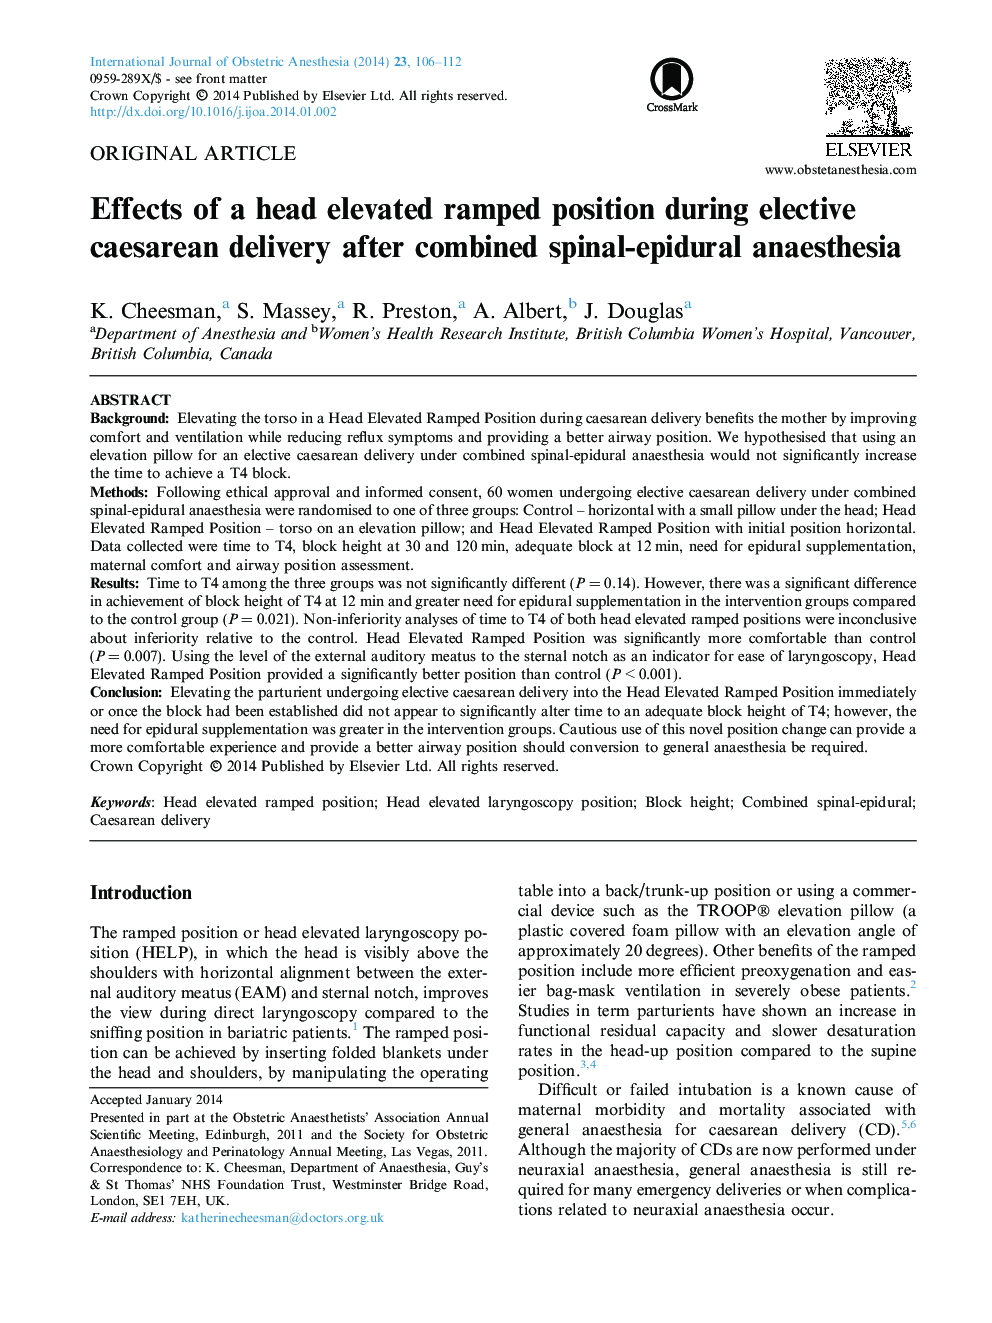 Effects of a head elevated ramped position during elective caesarean delivery after combined spinal-epidural anaesthesia 